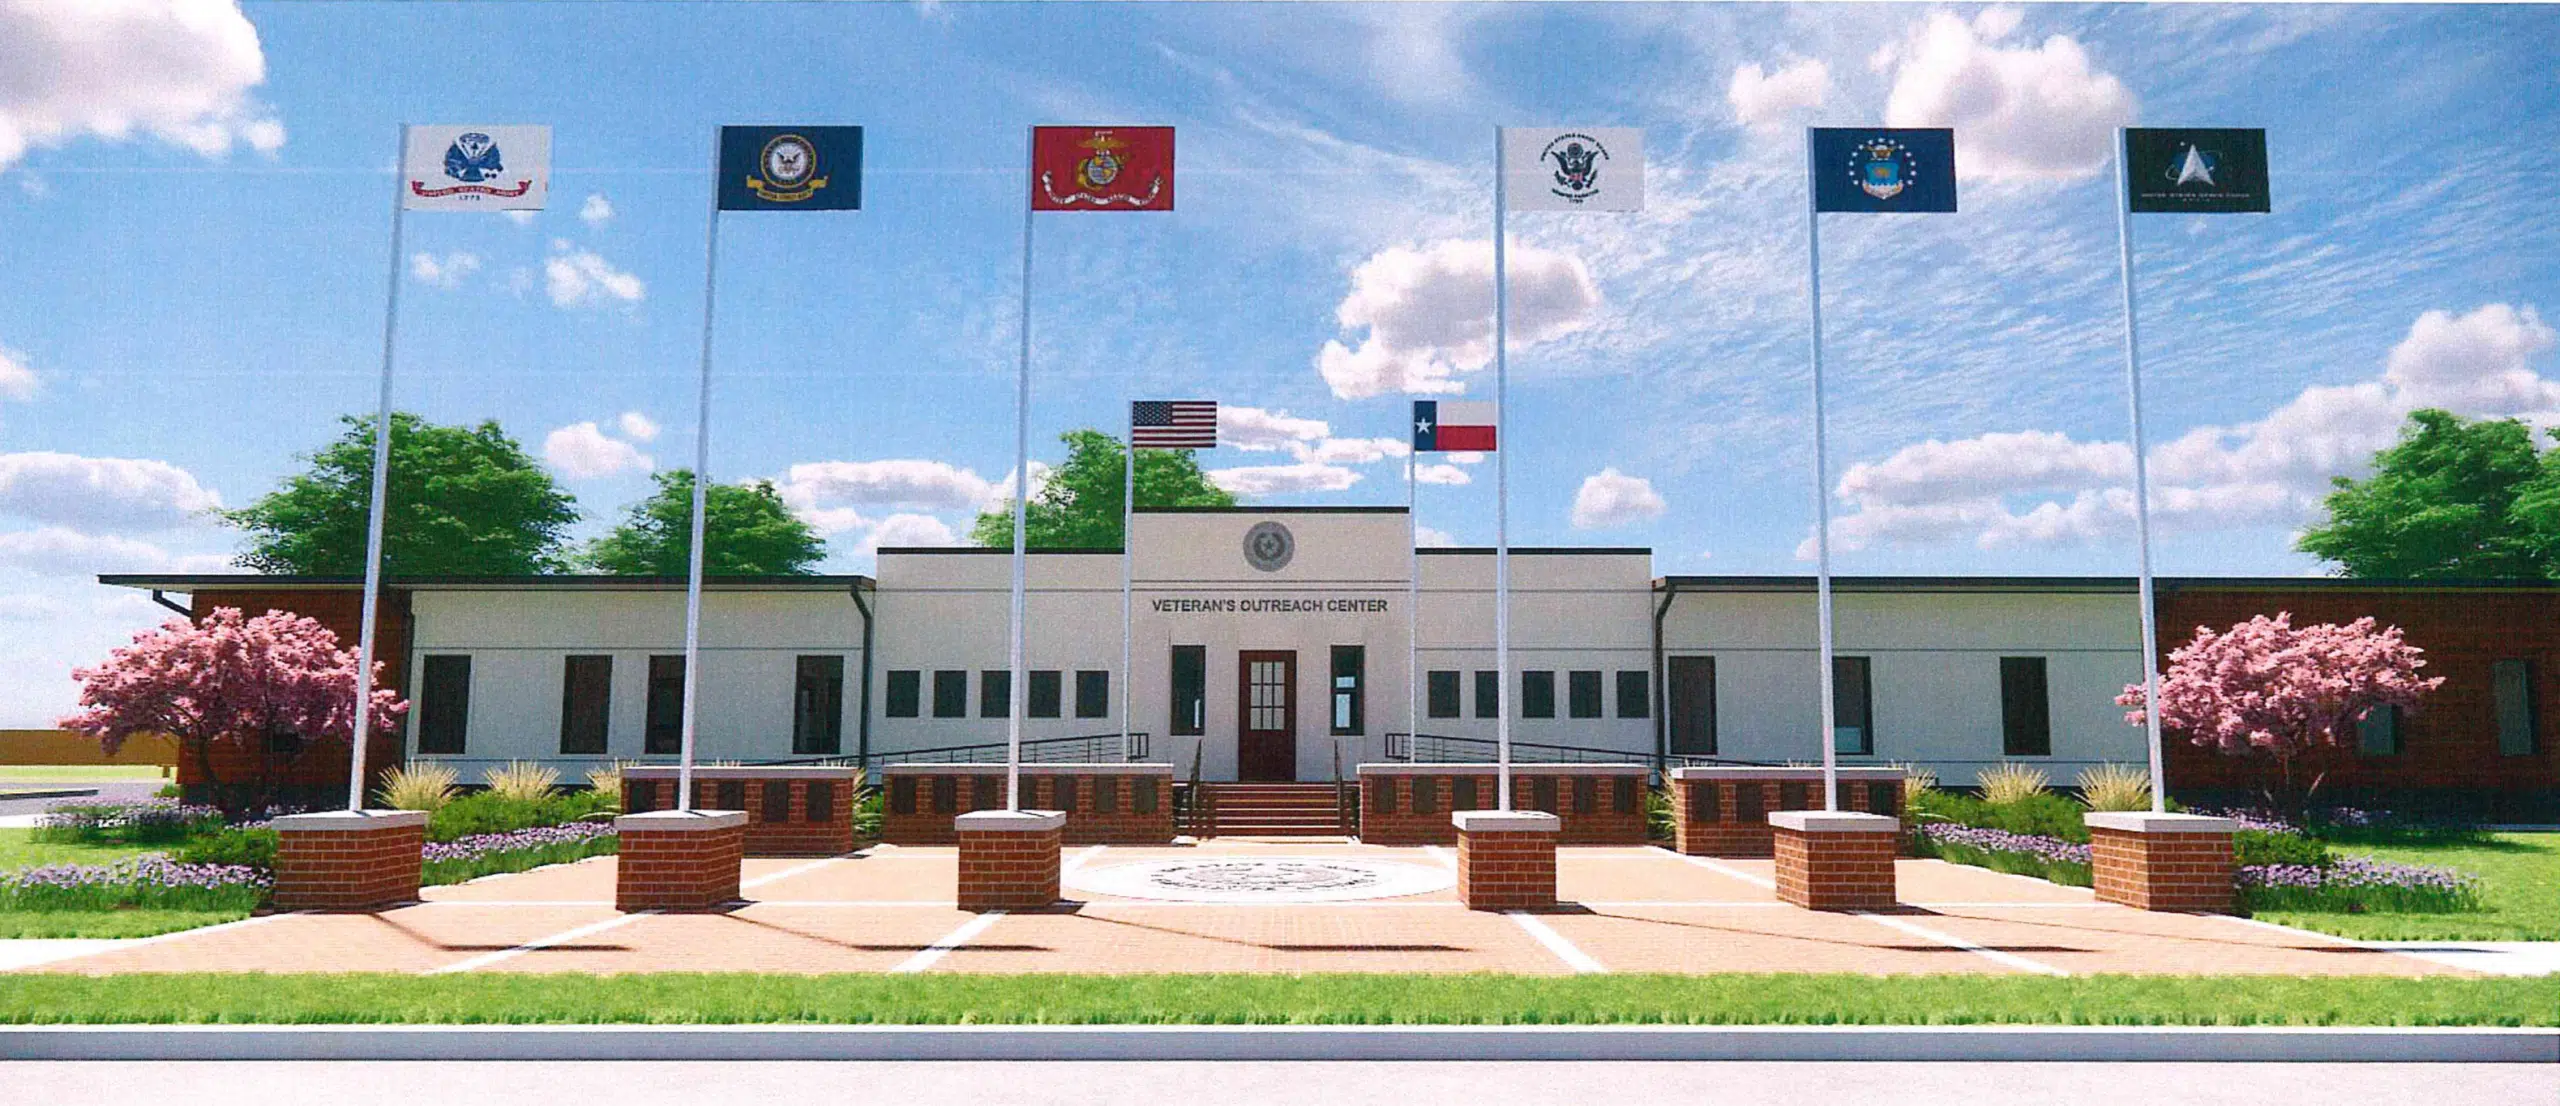 Plans get closer for new Guadalupe County Veterans Outreach Center